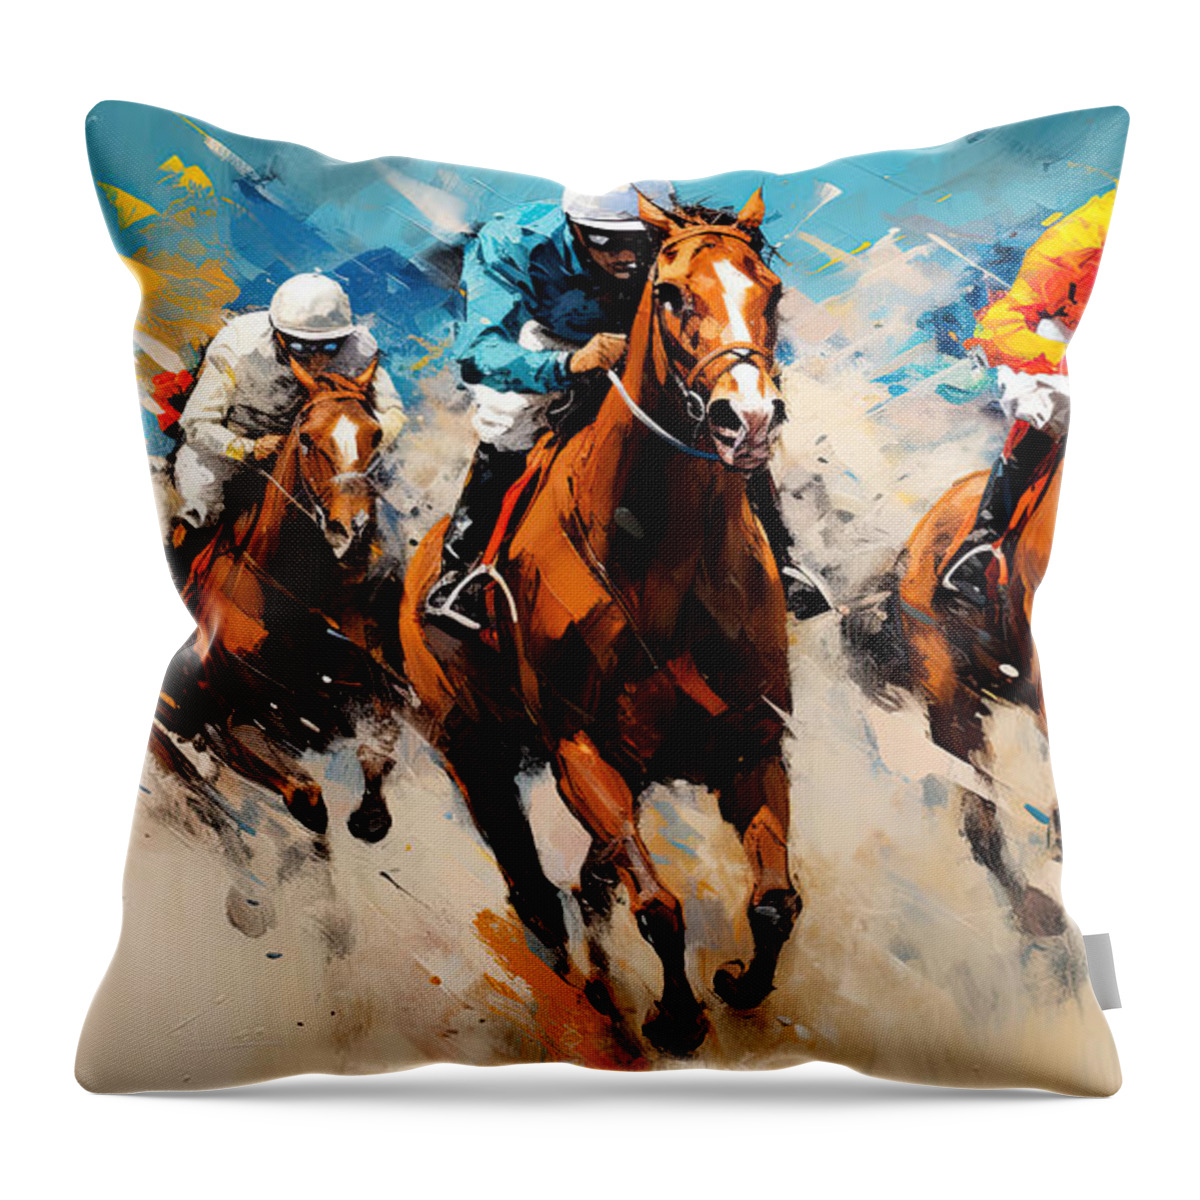 Horse Racing Throw Pillow featuring the painting A Flash of Fire by Lourry Legarde